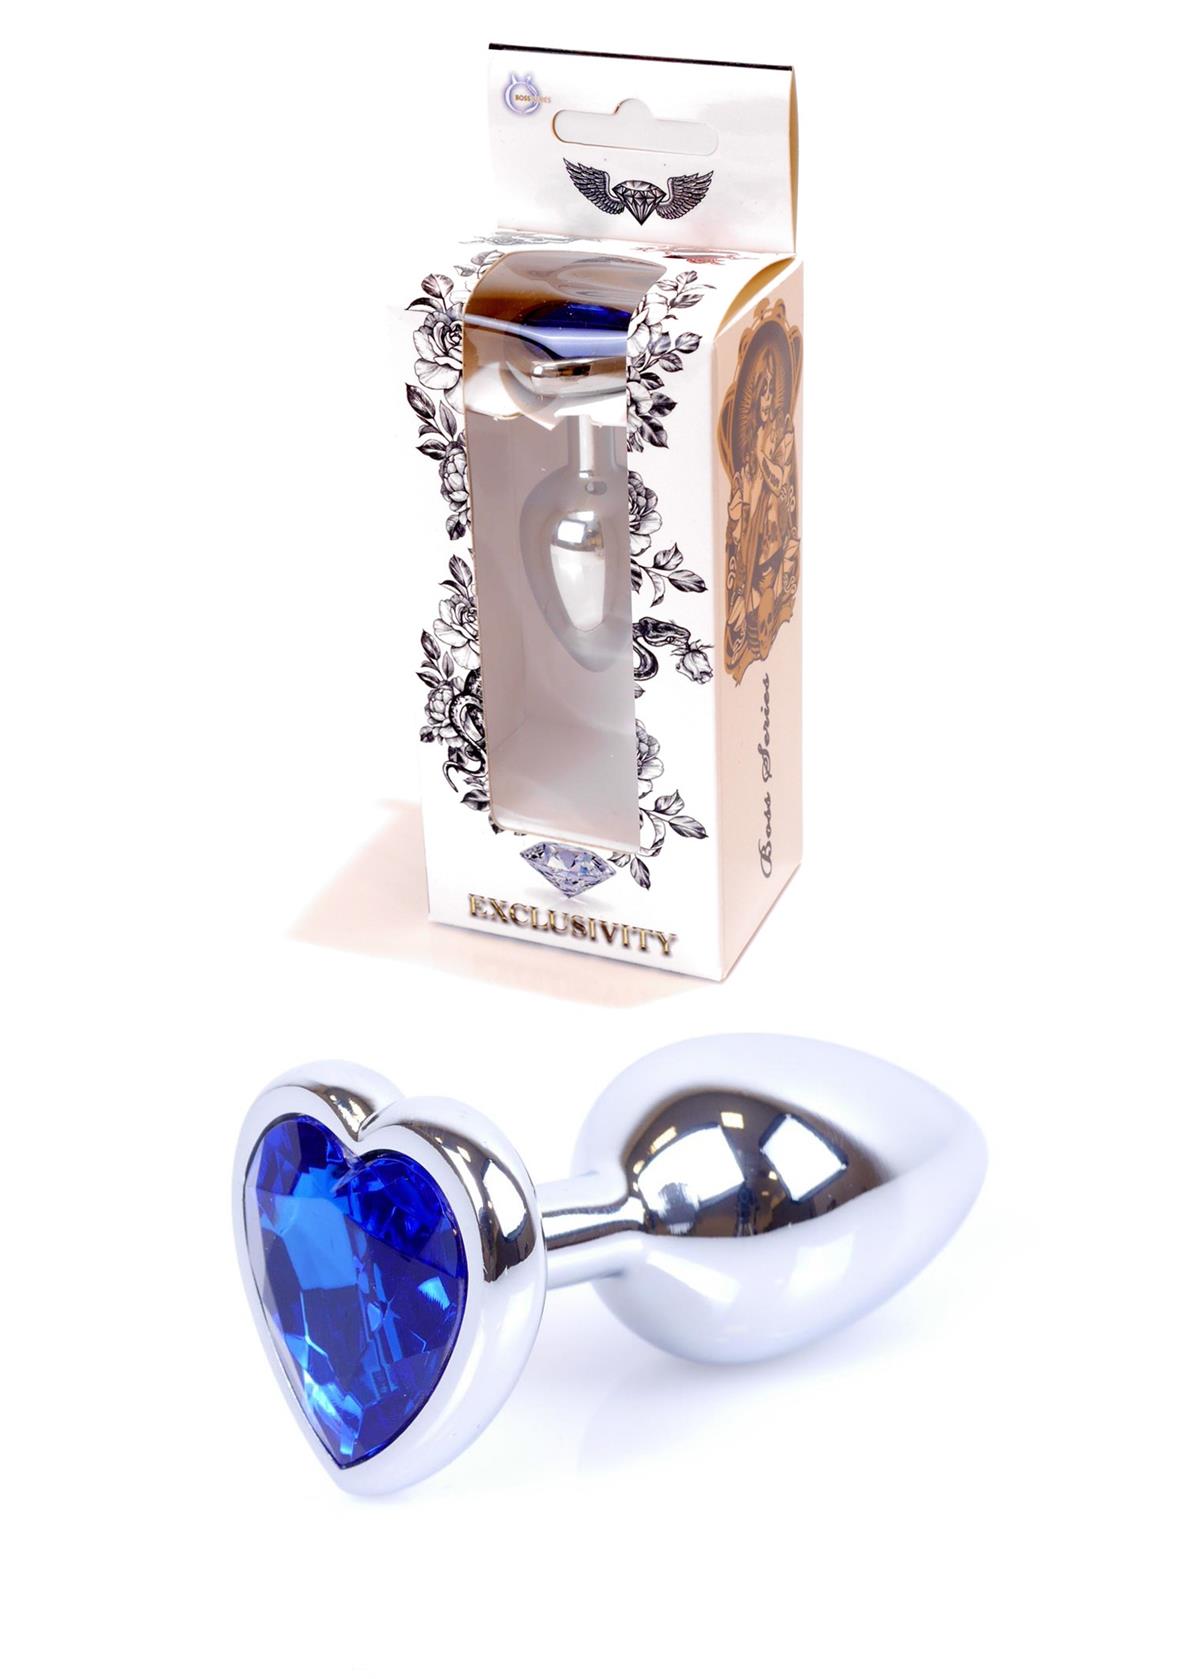 64-00050 silver heart plug with blue stone